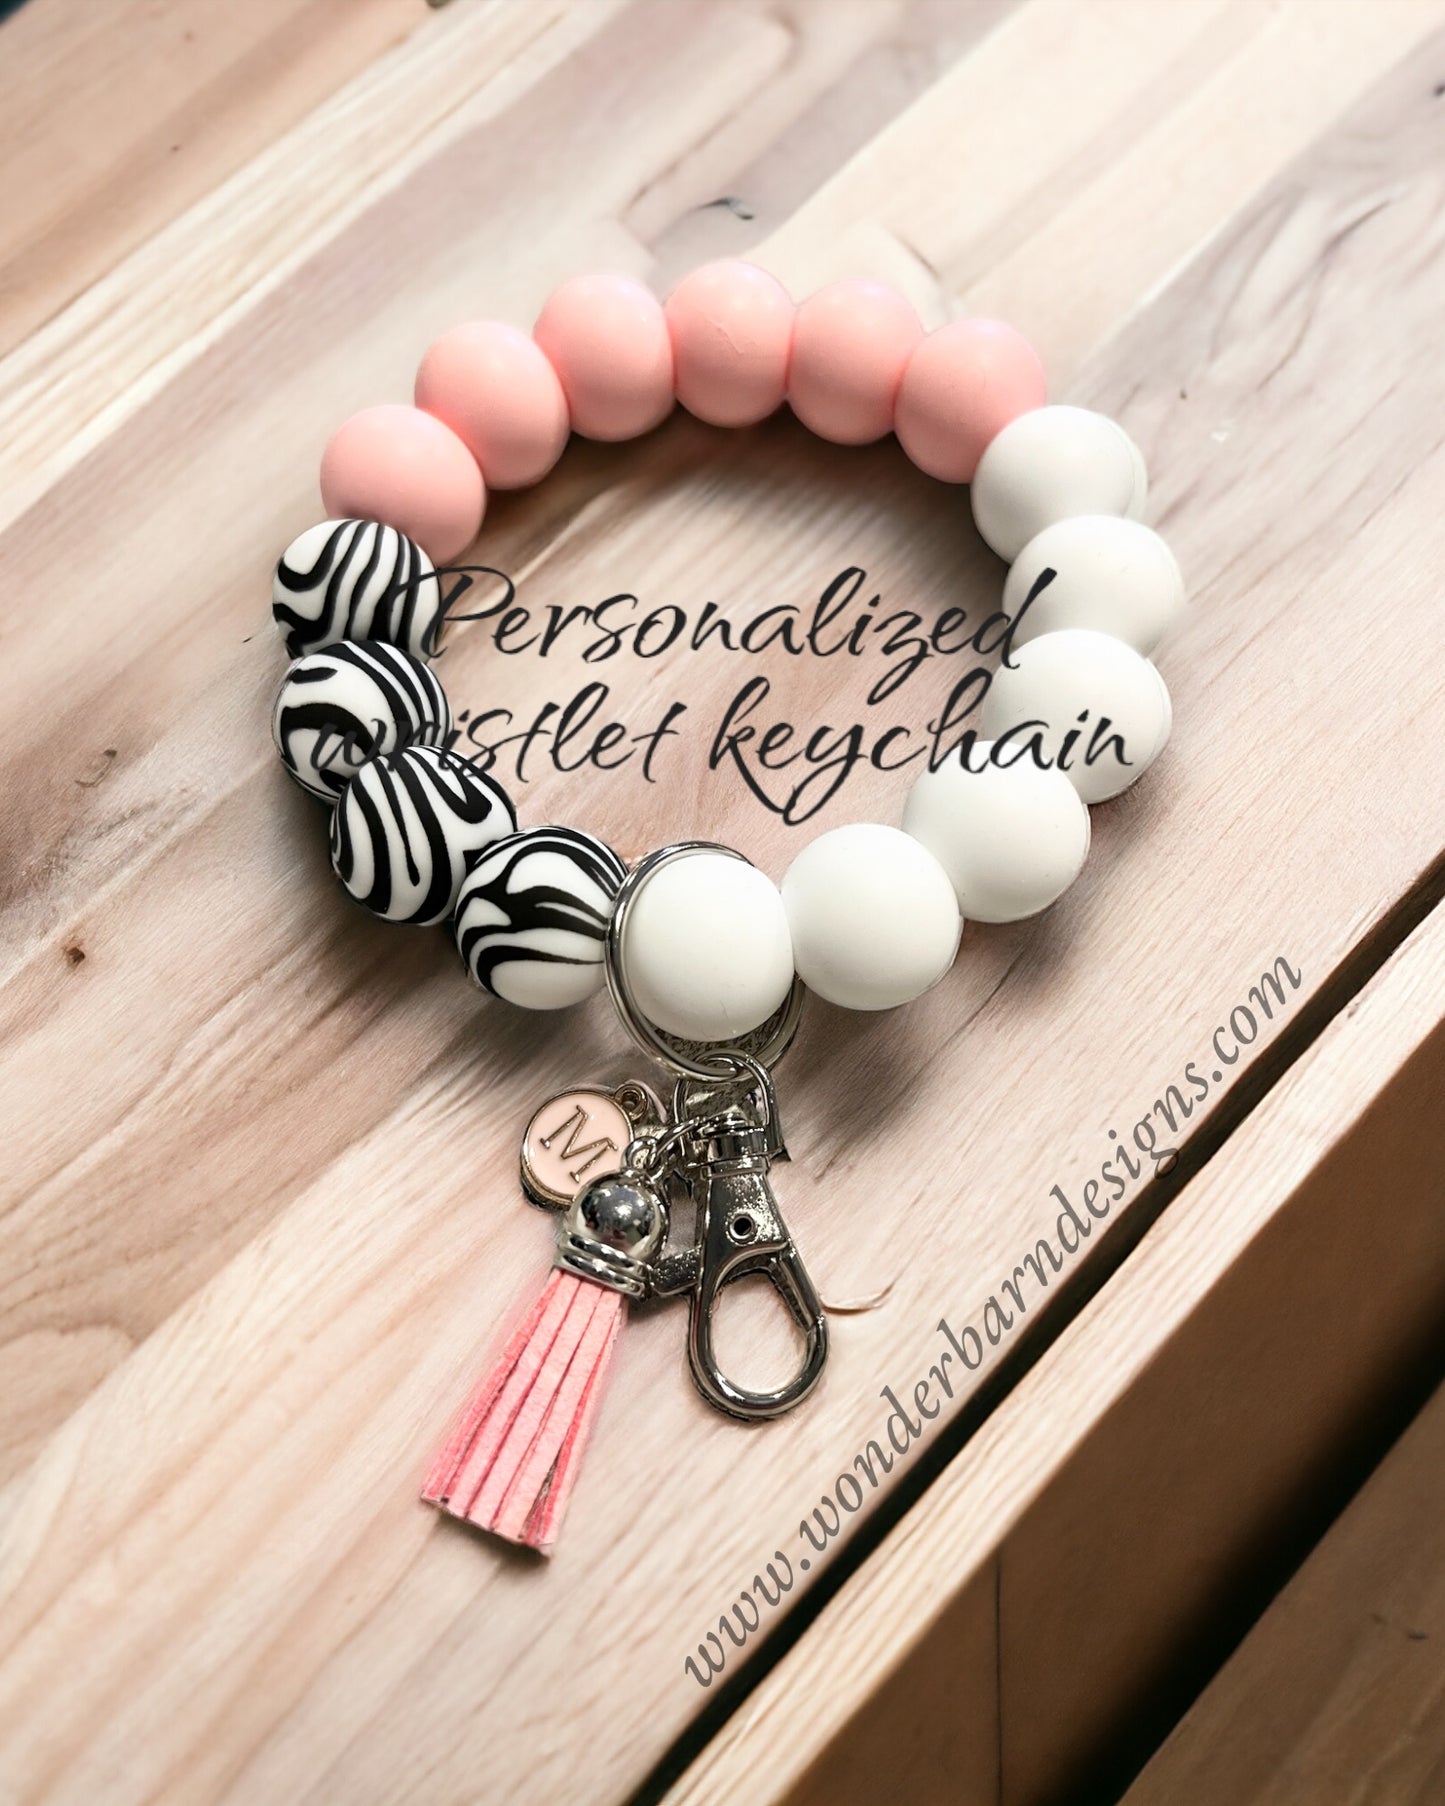 Personalized beaded bangle wristlet keychain with optional embroidered wallet